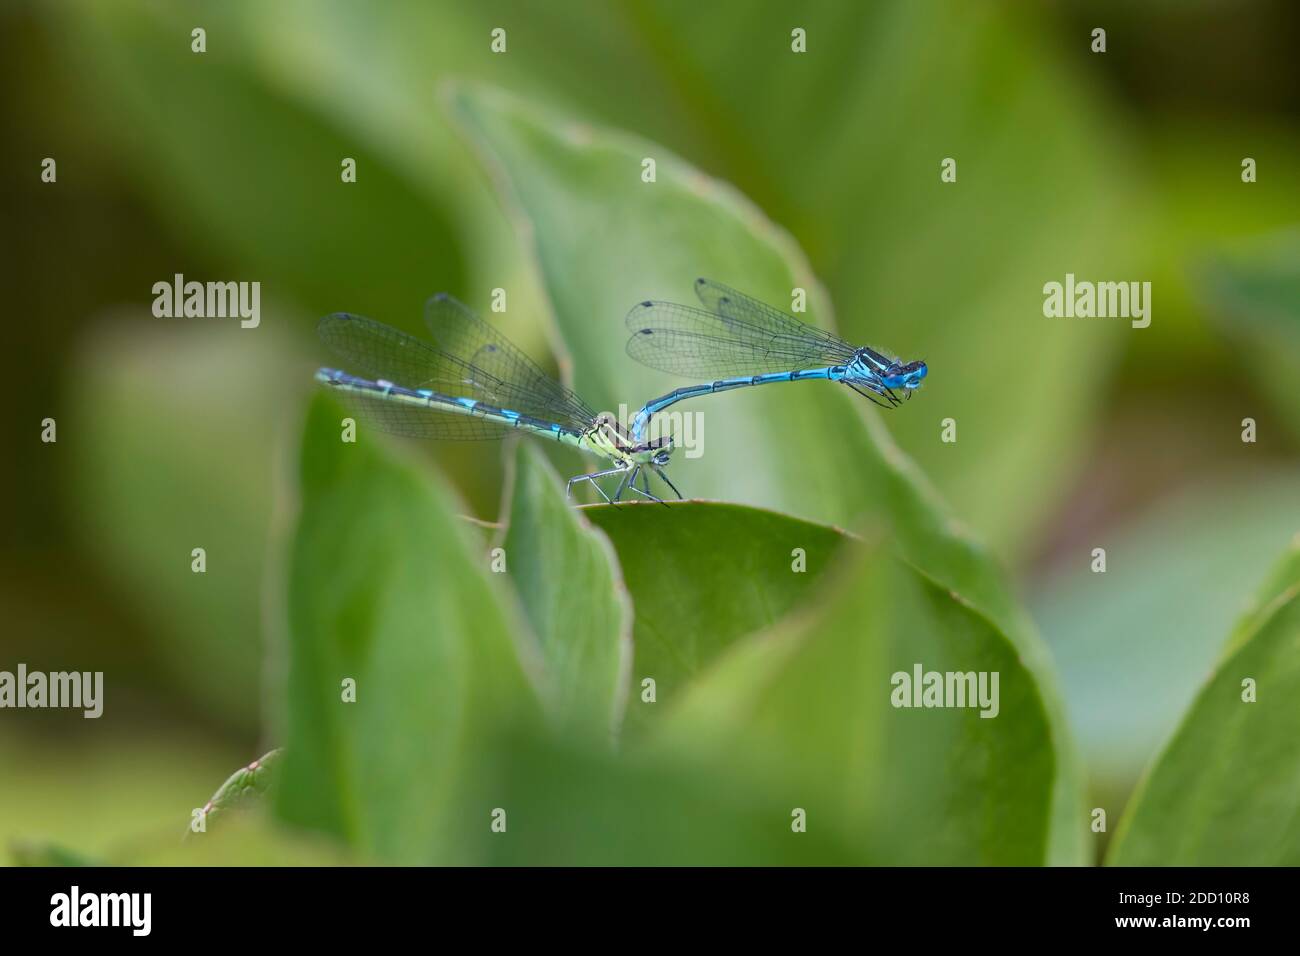 Azure Damselflies, Coenagrion puella, perched on Bogbean leaves in a pond, Dumfries & Galloway, Scotland Stock Photo